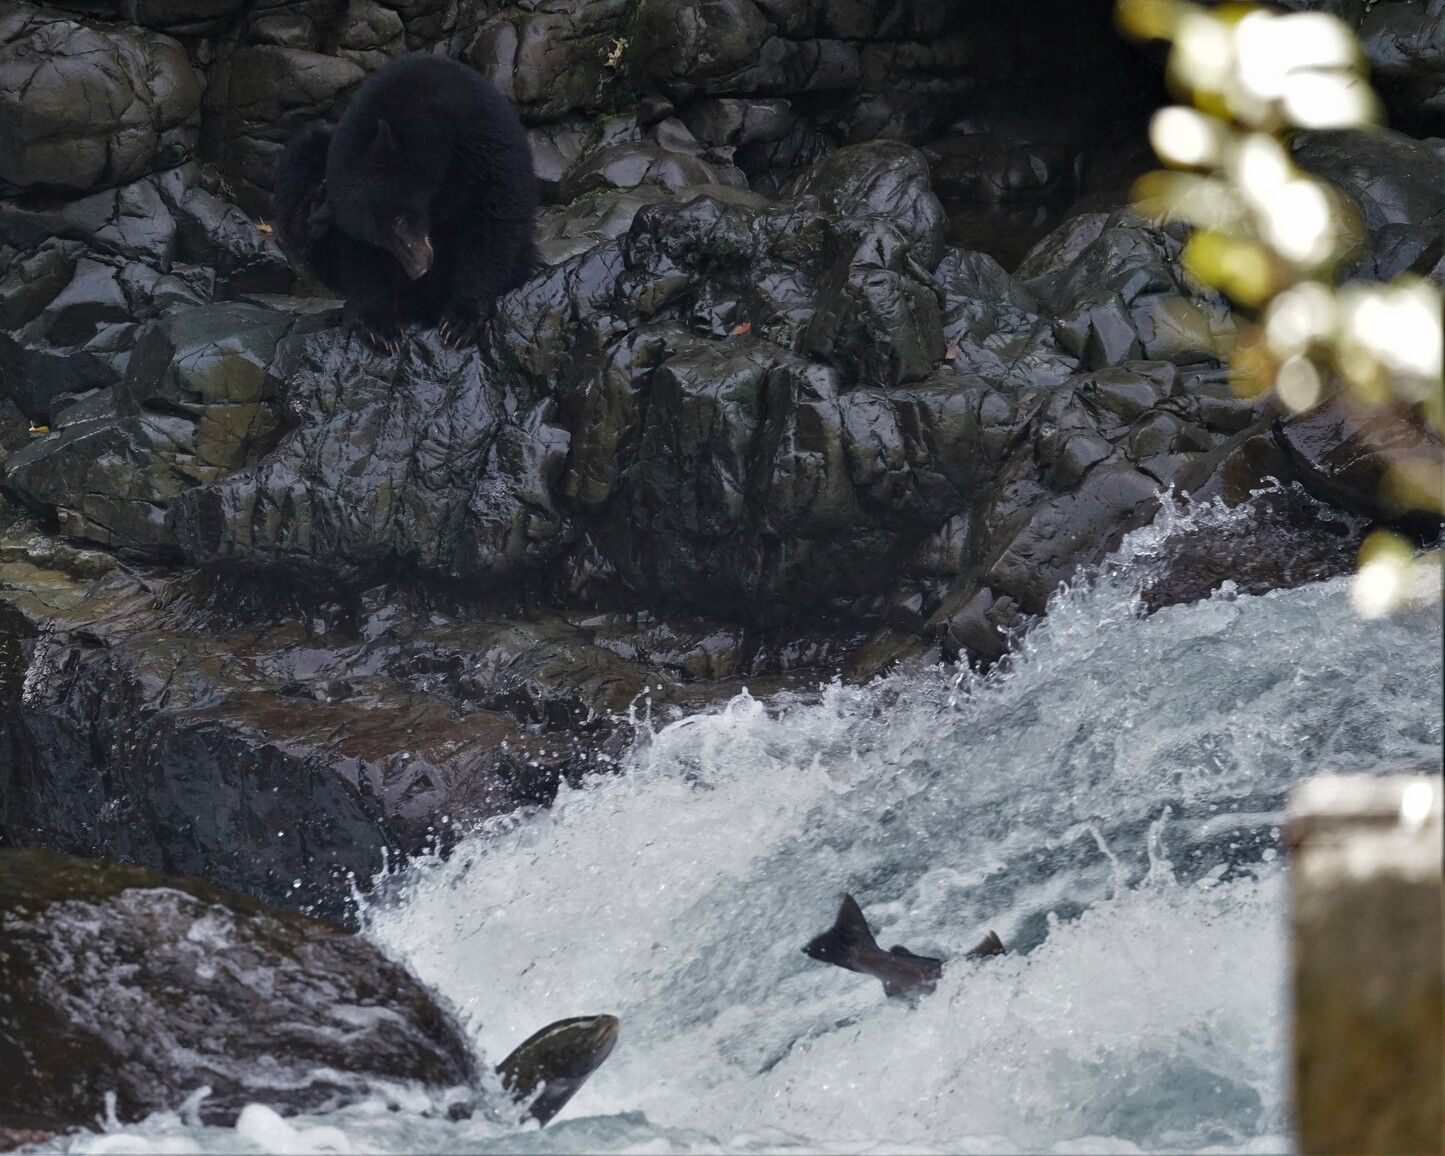 Chinook salmon (Oncorhynchus tshawytscha) jumping upriver while a black bear (Ursus americanus) watches from the rocks. Stamp River Park.